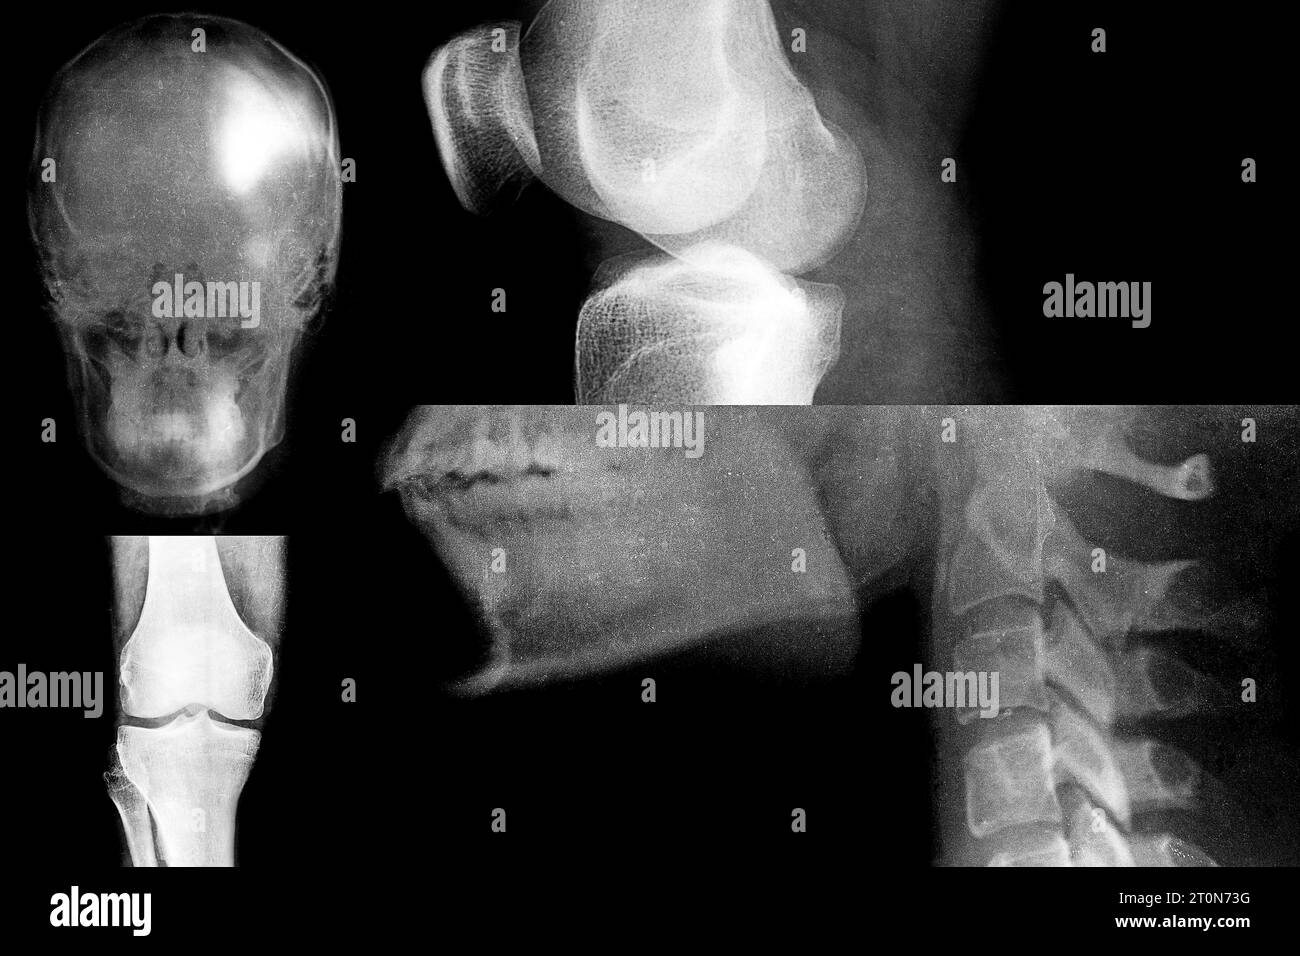 Set of x-ray body parts such as human knee, head, jaw and teeth, group of x-ray images for diagnosing different types of diseases, skeleton Stock Photo